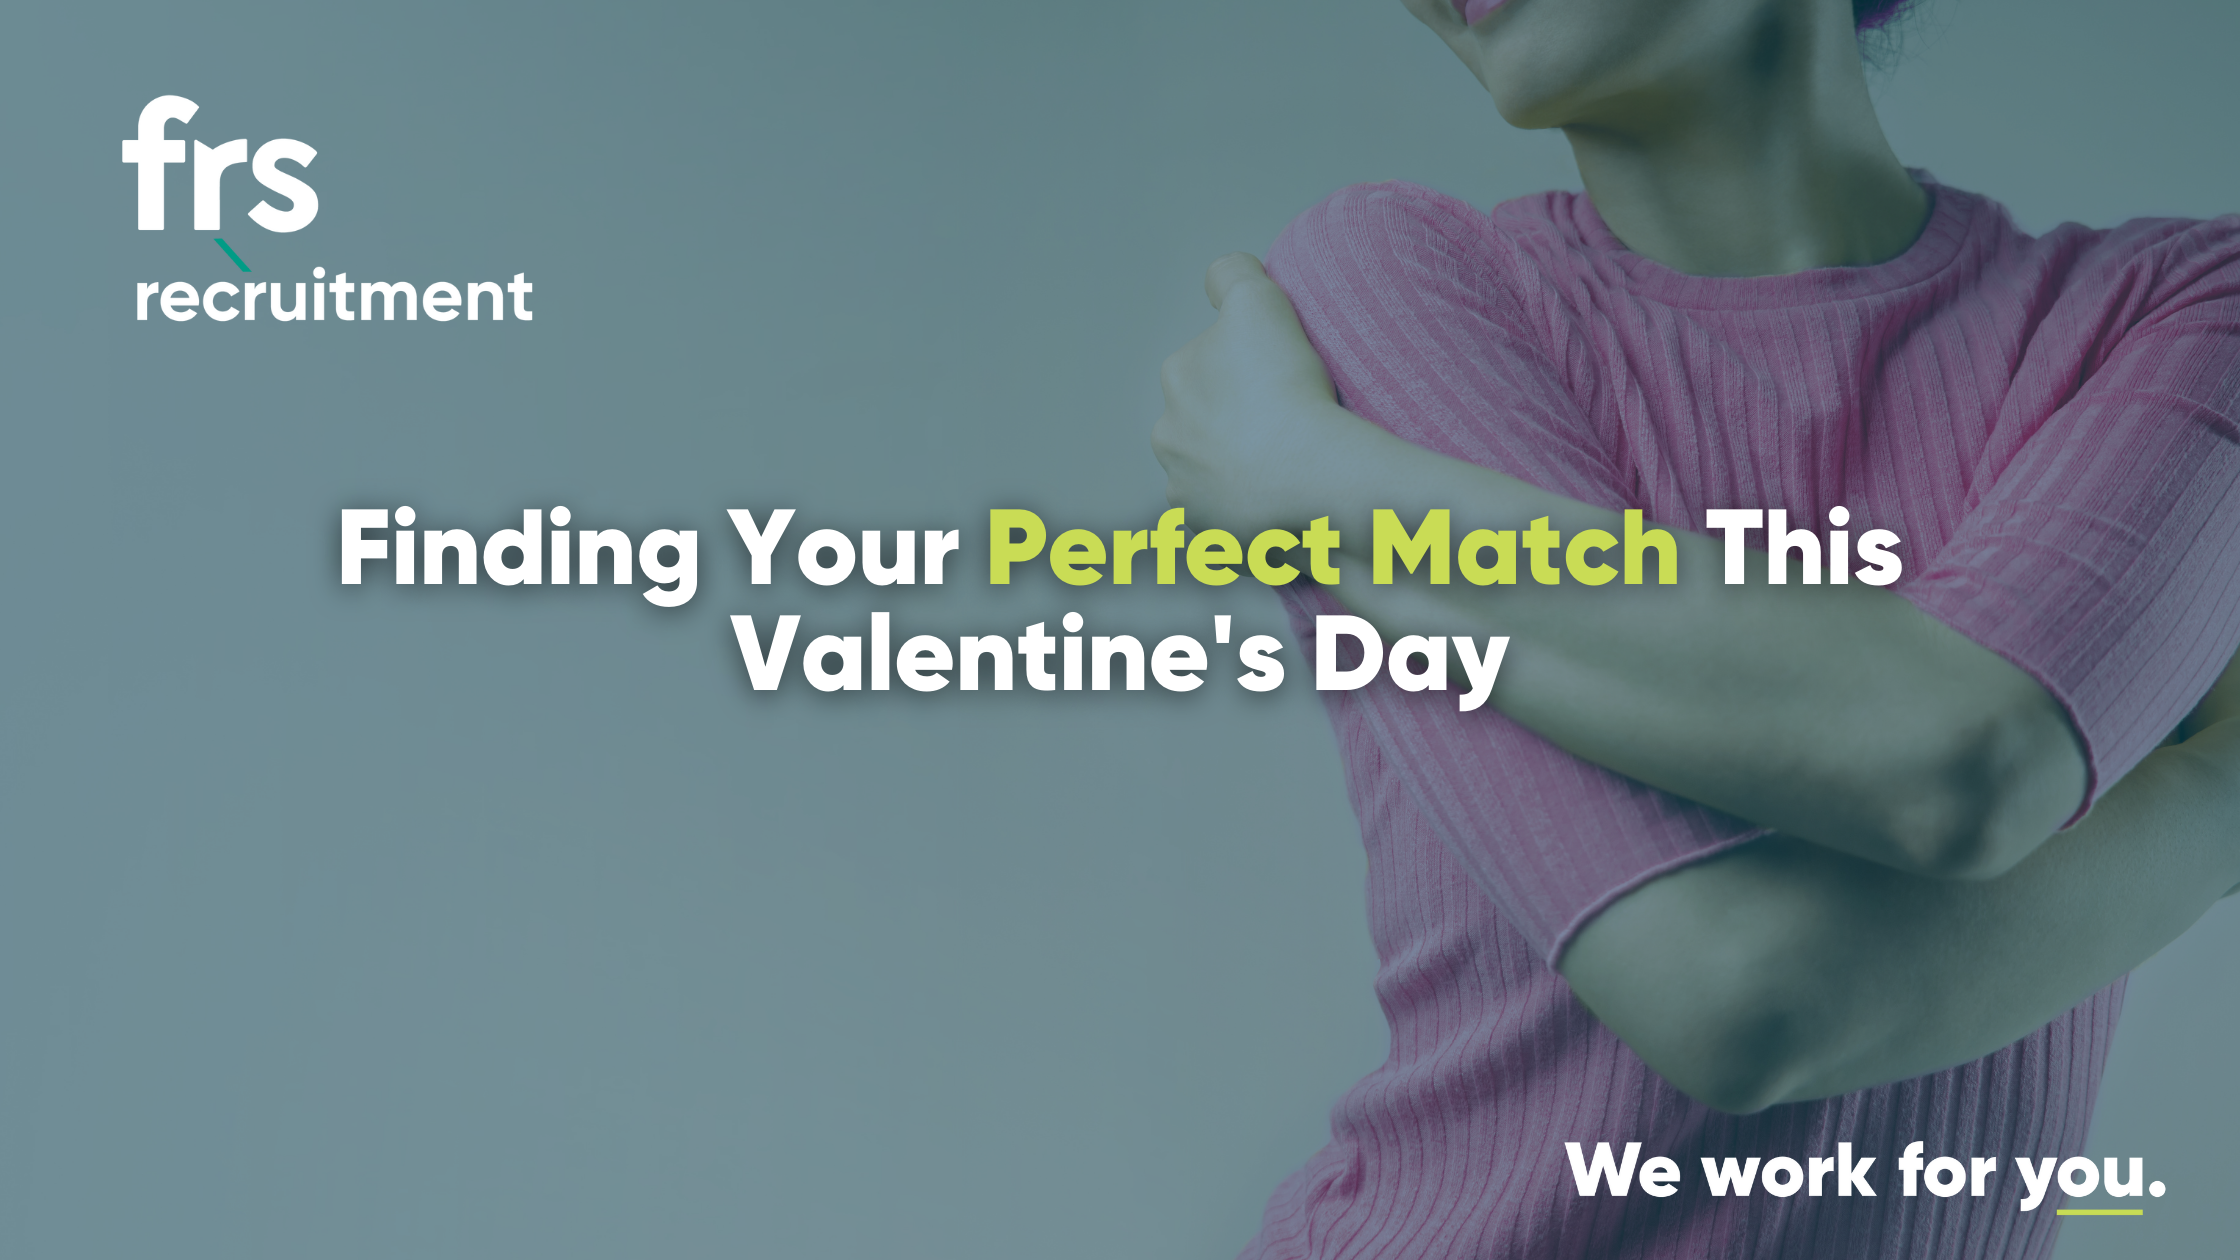 Finding Your Perfect Match This Valentine's Day